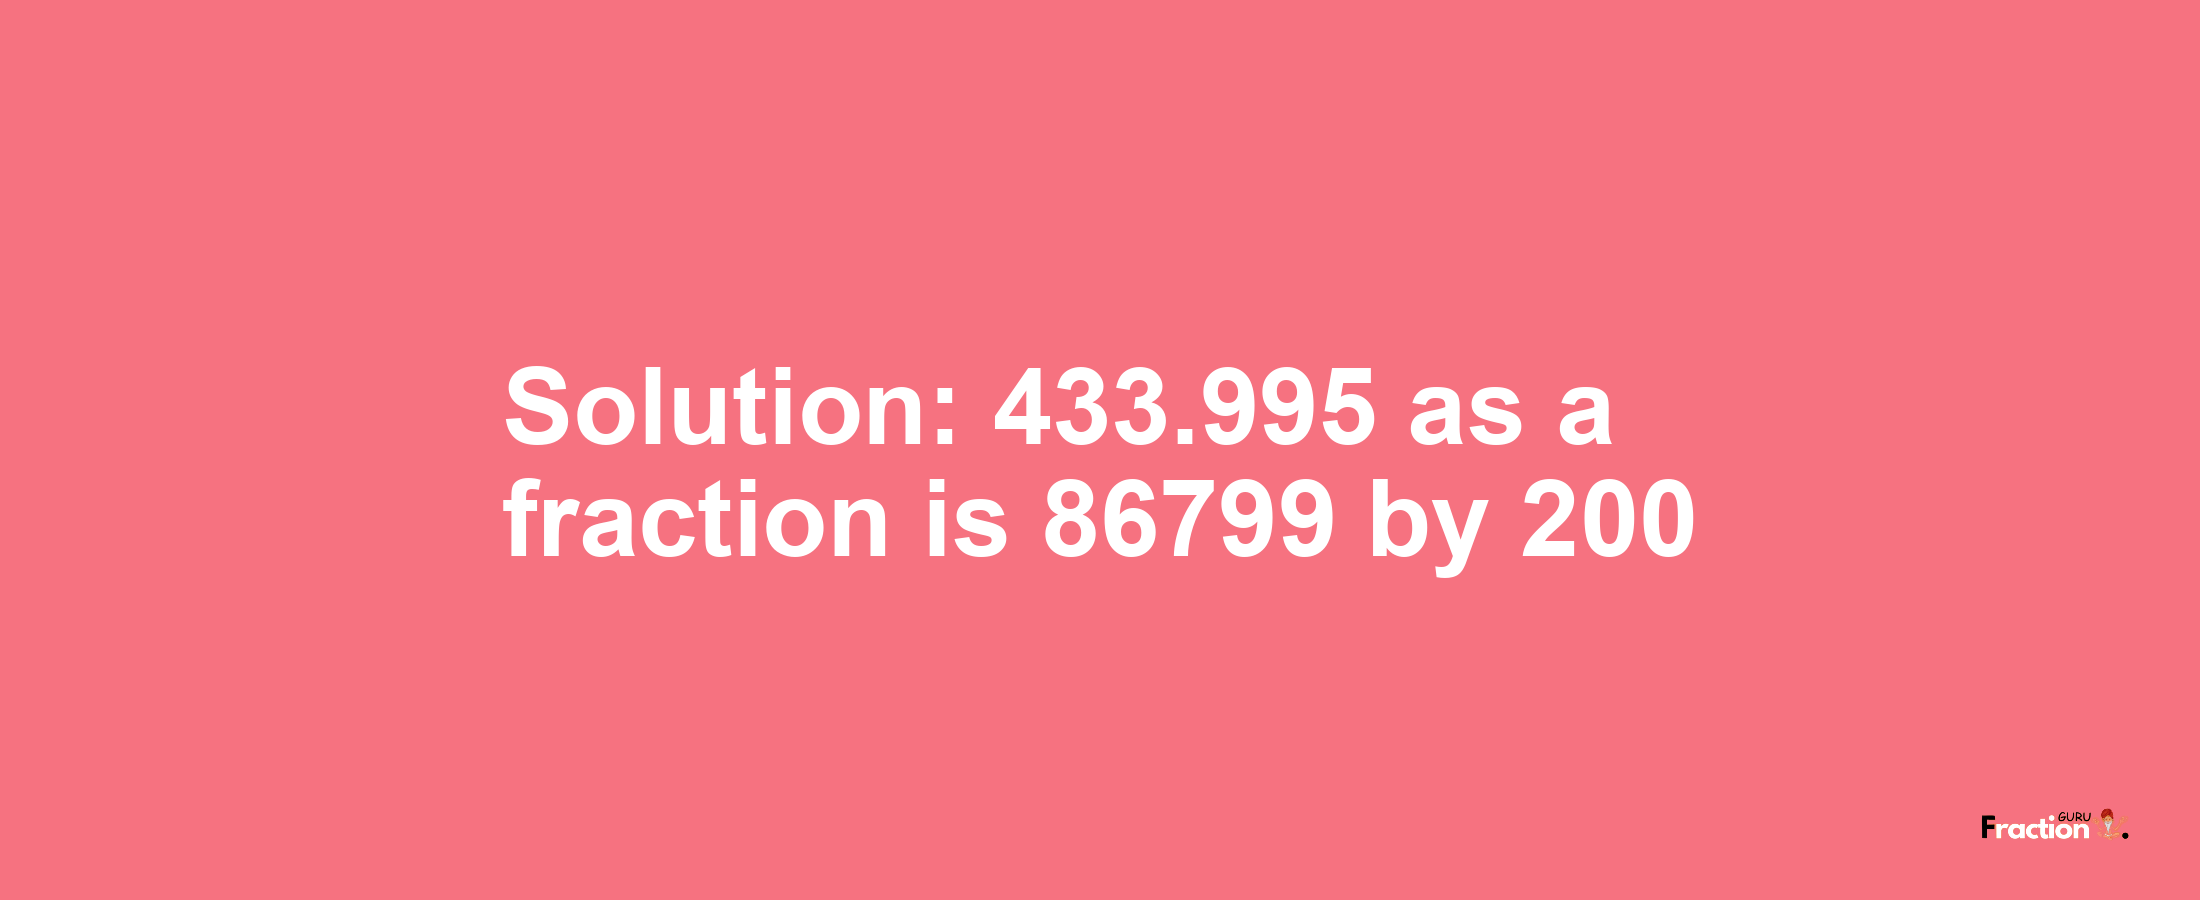 Solution:433.995 as a fraction is 86799/200